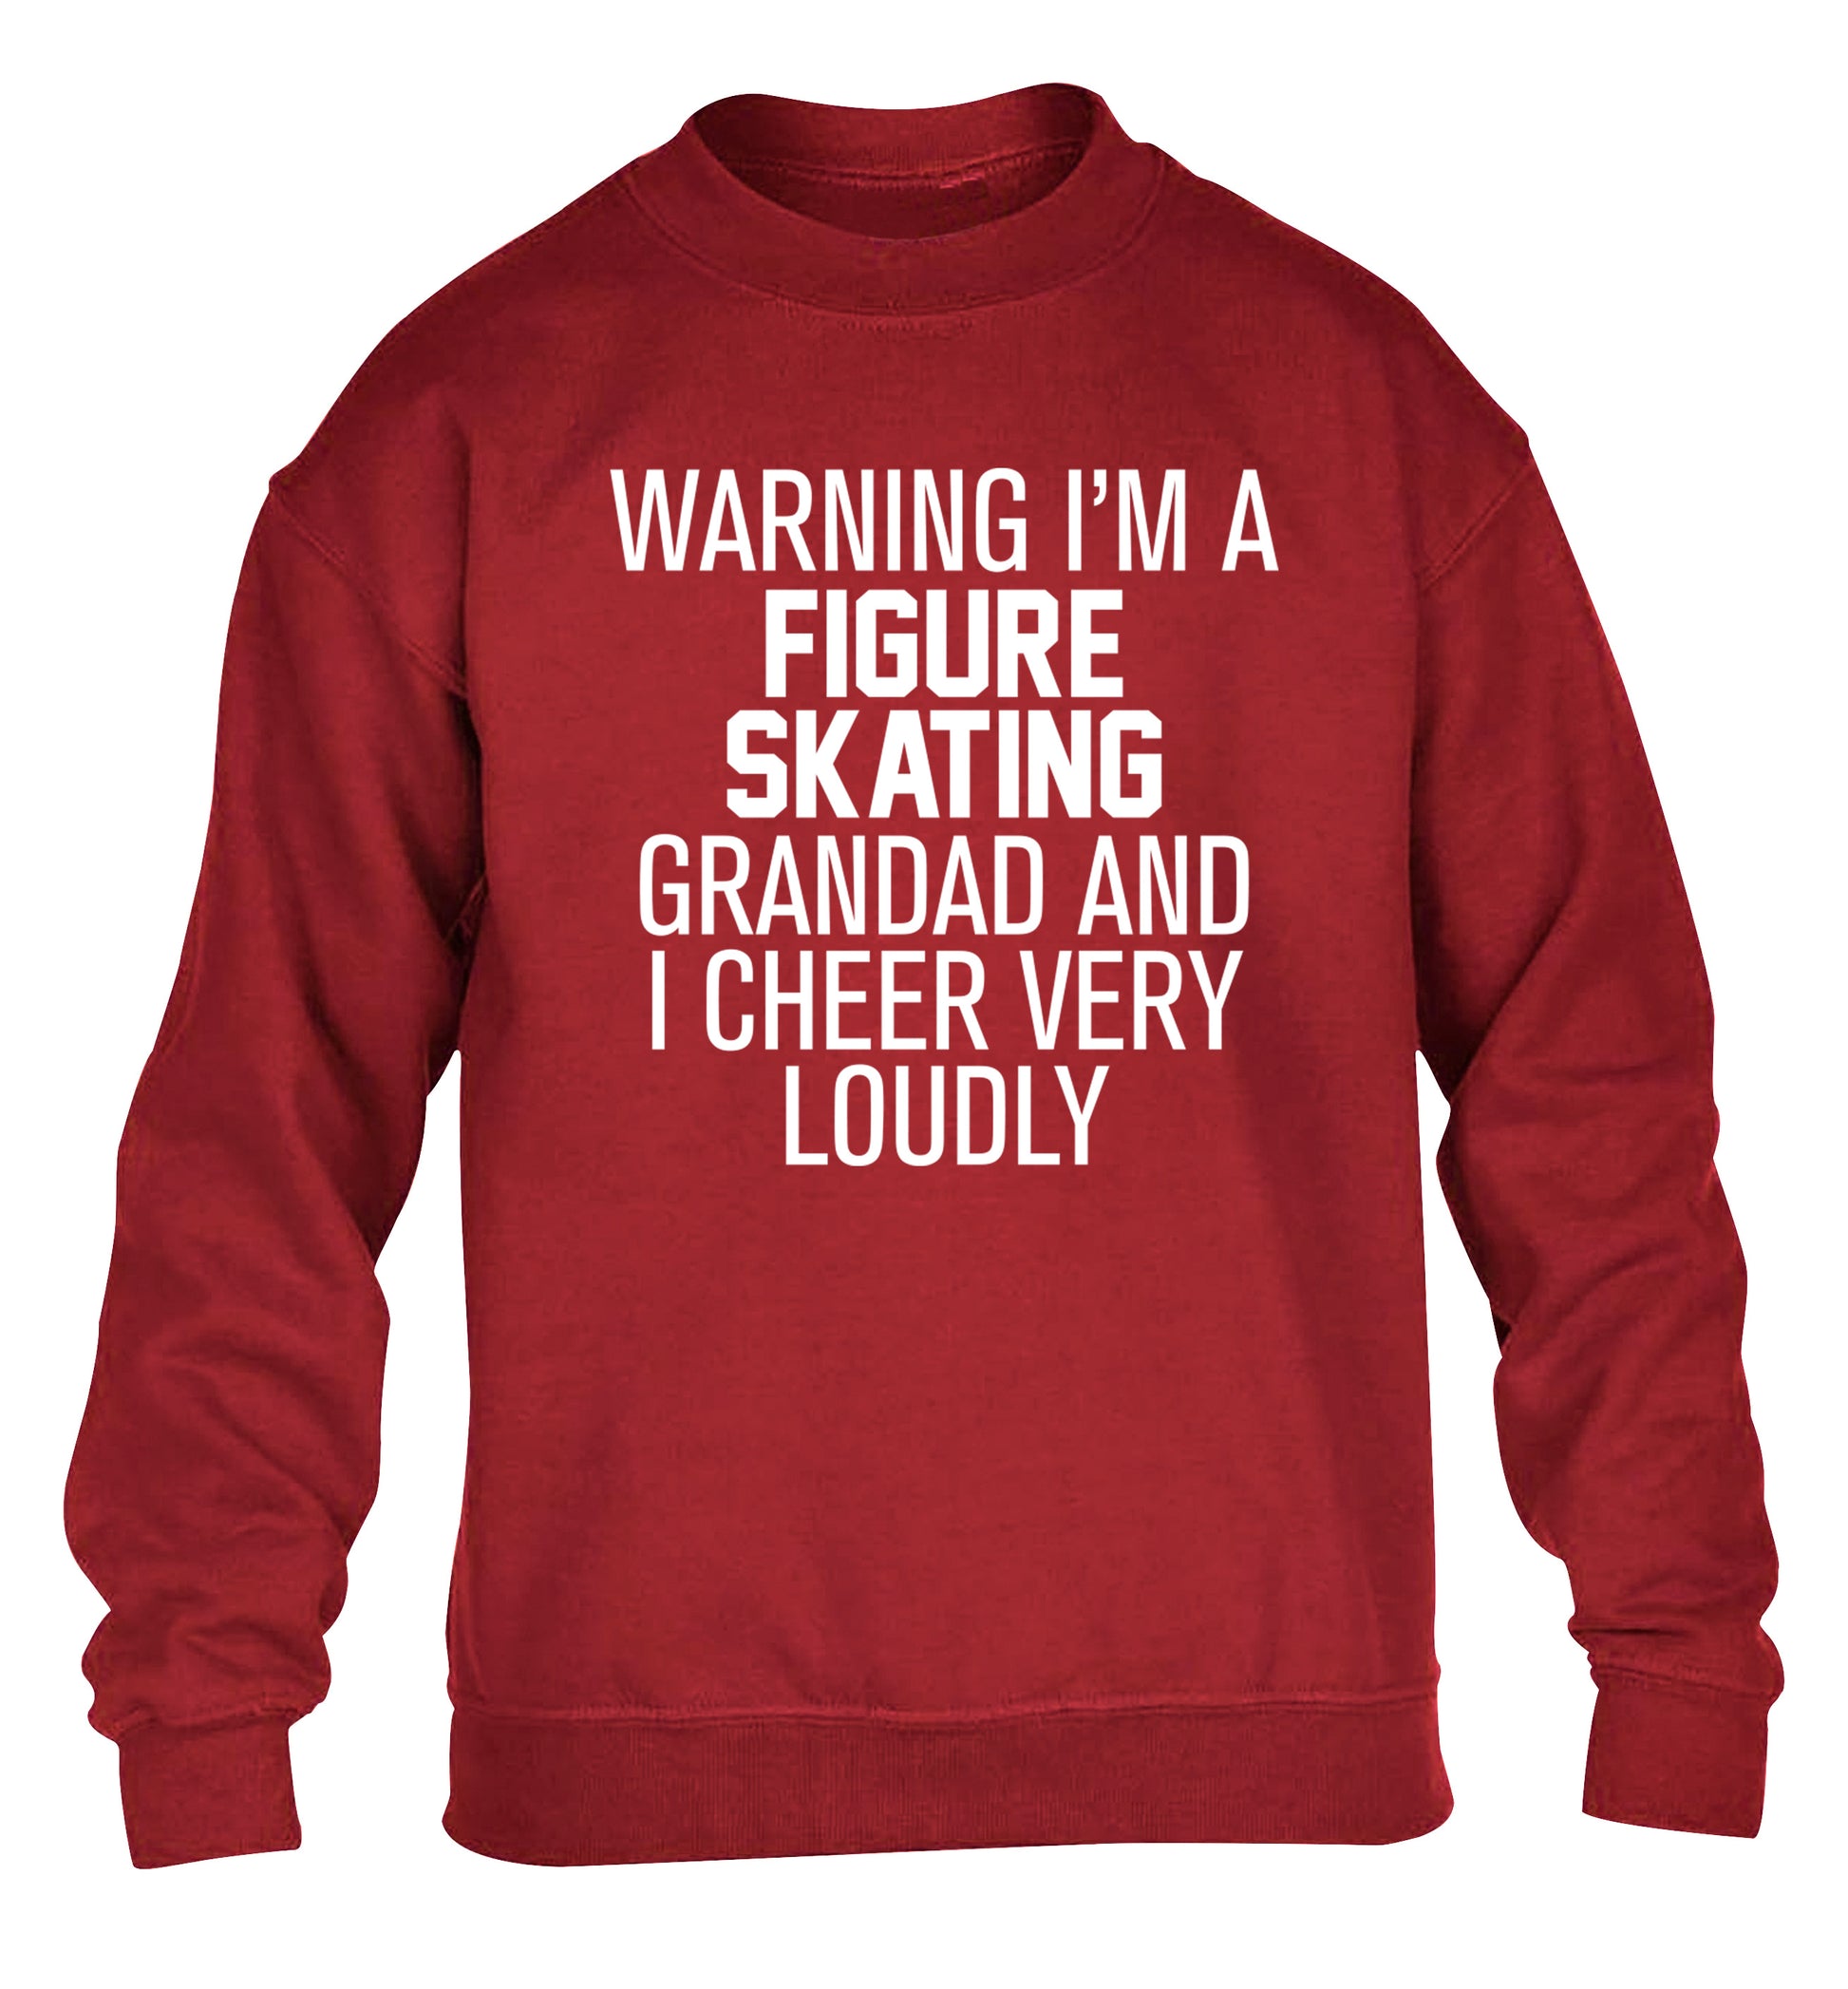 Warning I'm a figure skating grandad and I cheer very loudly children's grey sweater 12-14 Years